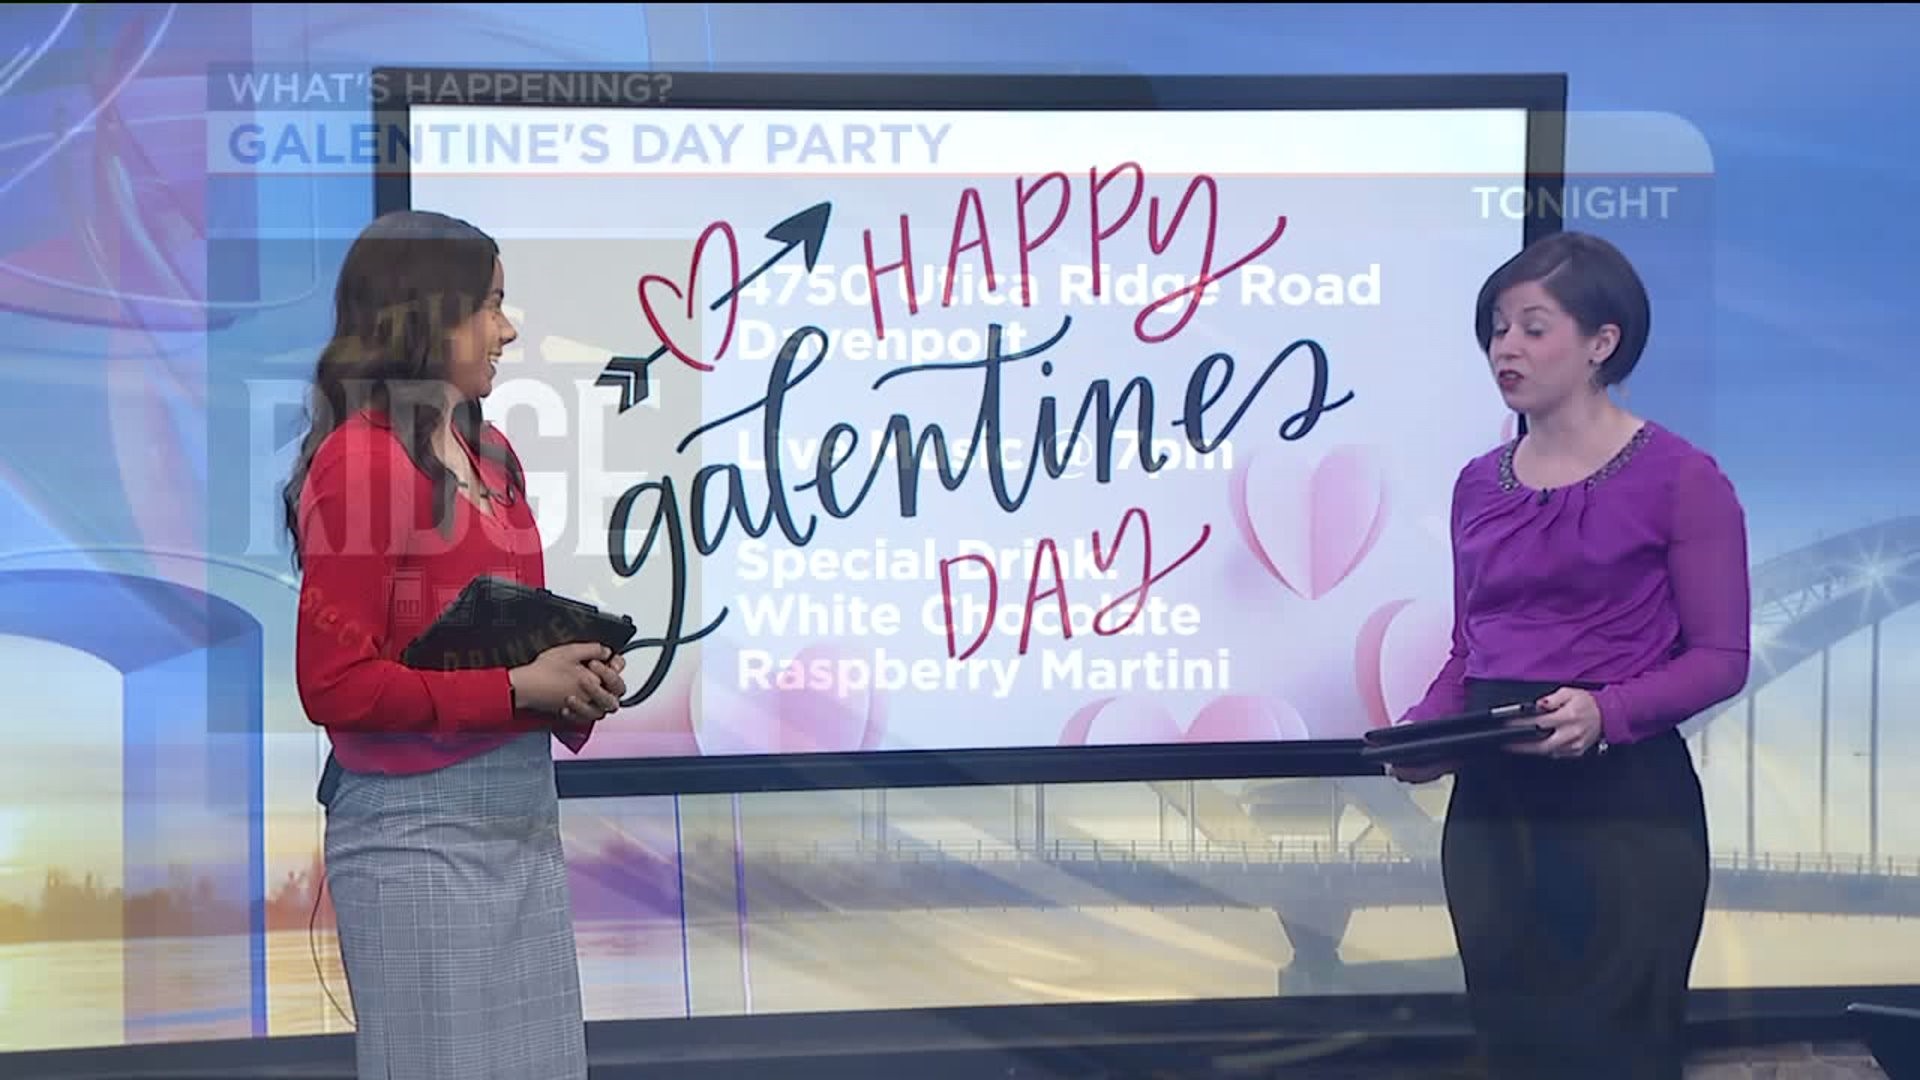 A Galentine`s Day Version of What`s Happening?